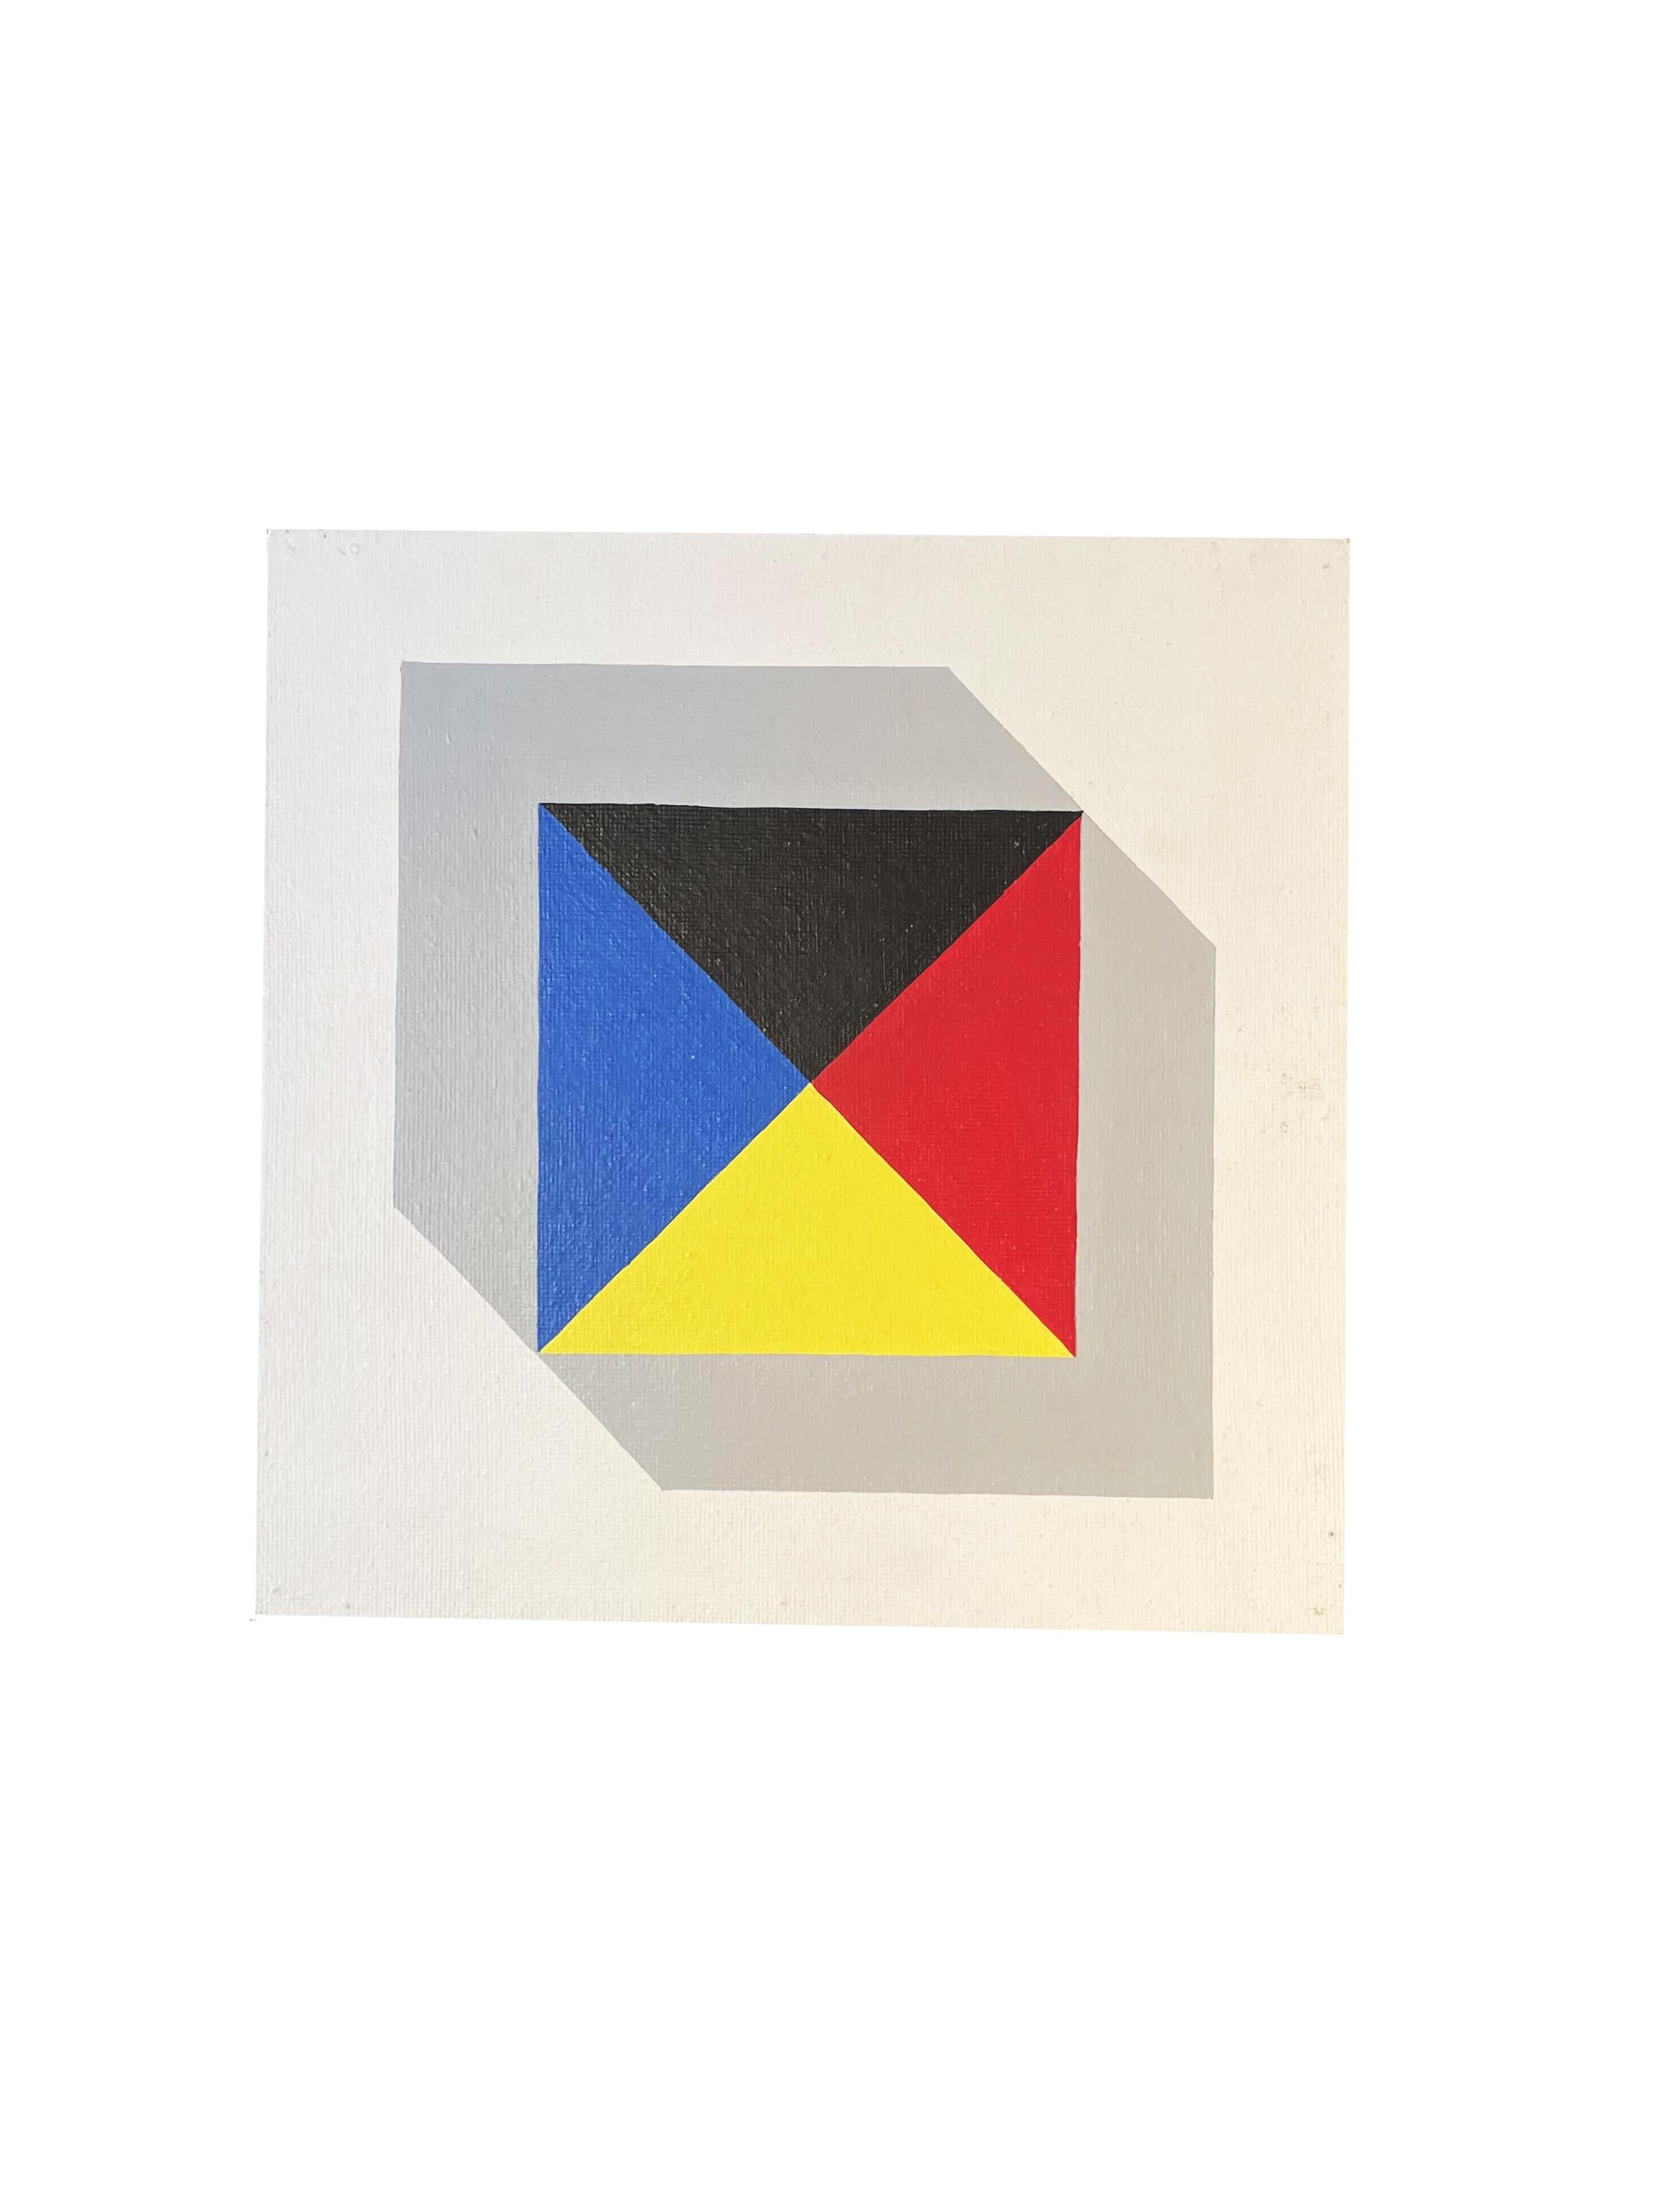 Beautiful suite of 11 paintings by Bernard Beraud, 1988, France.
This suite of paintings with geometric shapes and primary colors is composed of a series of 9 paintings of 21 x 21 cm.
We also find in this one a painting of 31 x 31 cm and a large